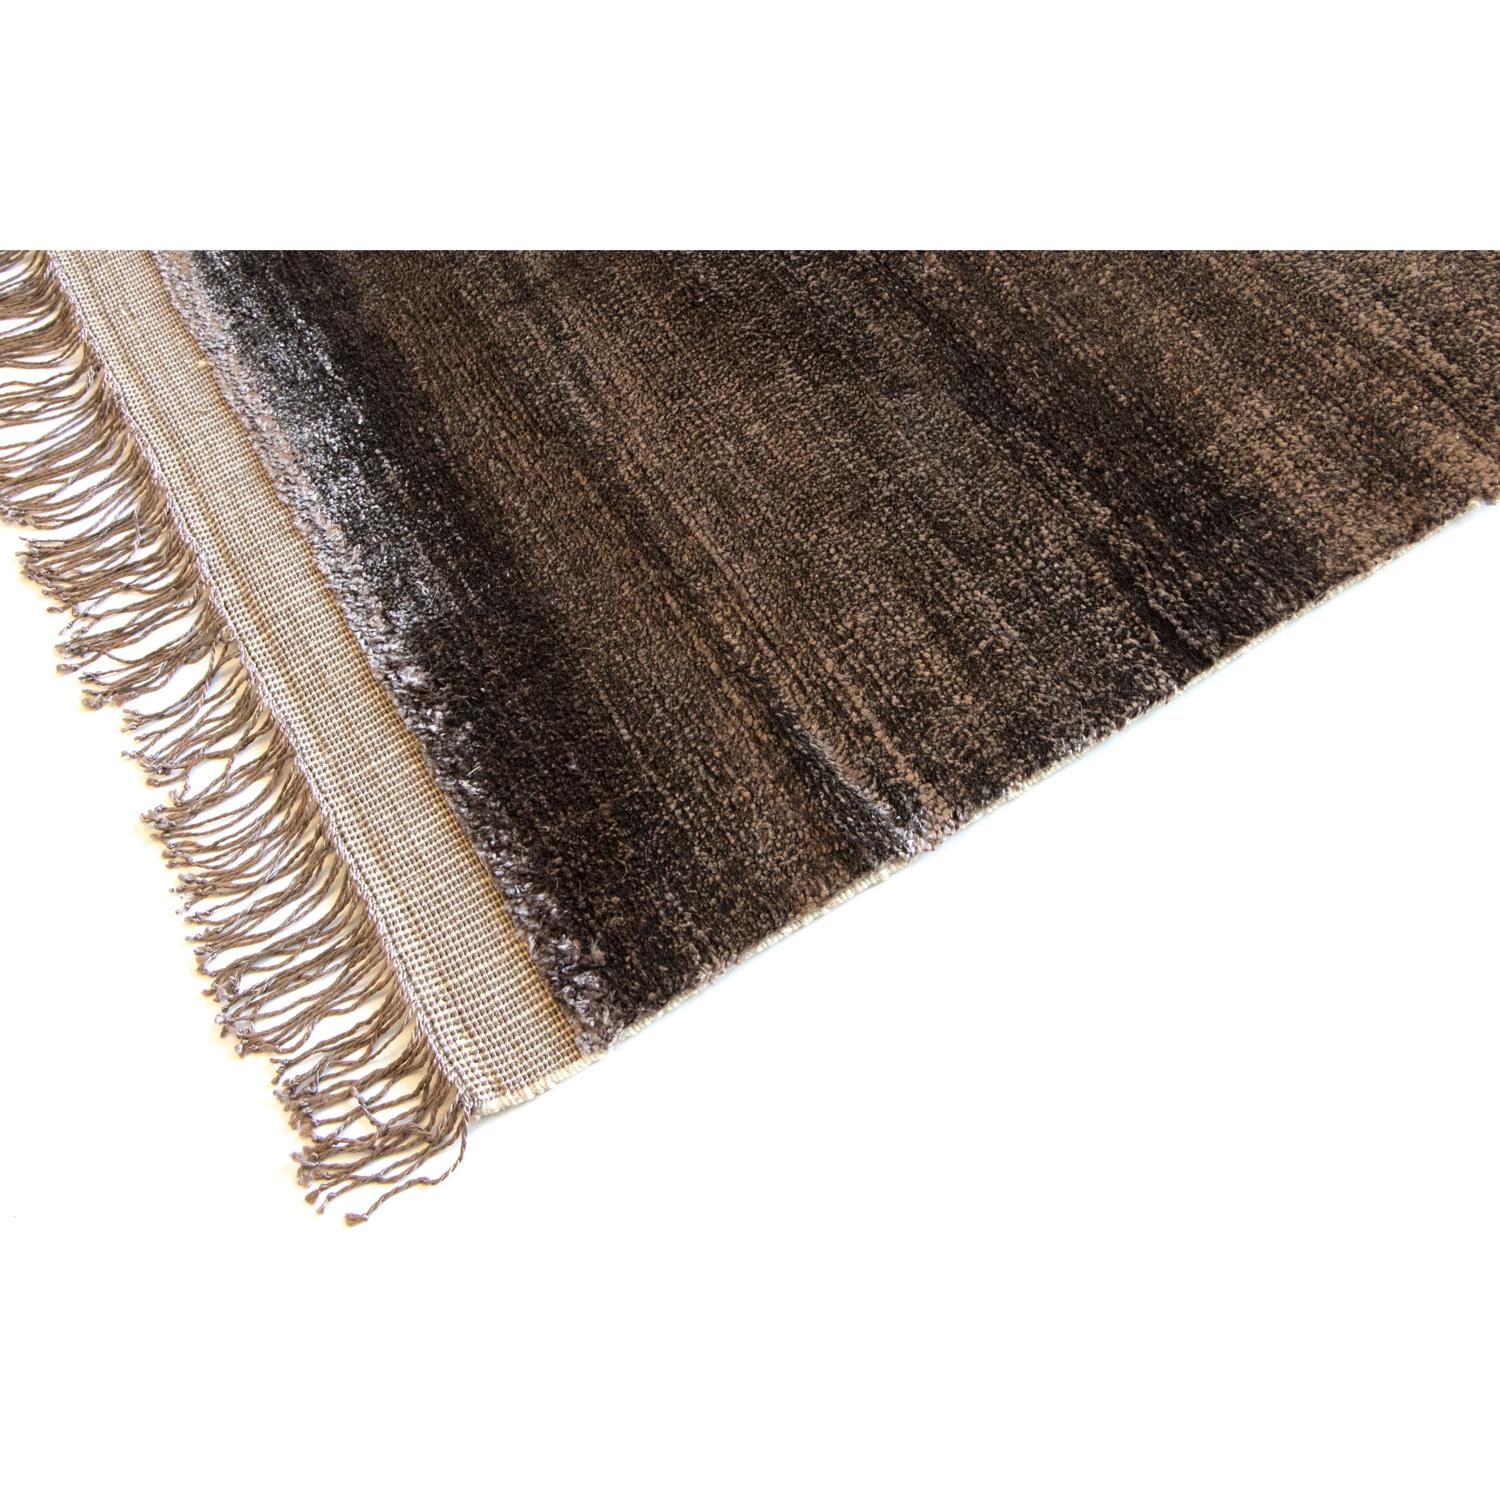 Hand-Woven 21st Cent Fringes Viscose Design Rug by Deanna Comellini In Stock 200x300 cm For Sale